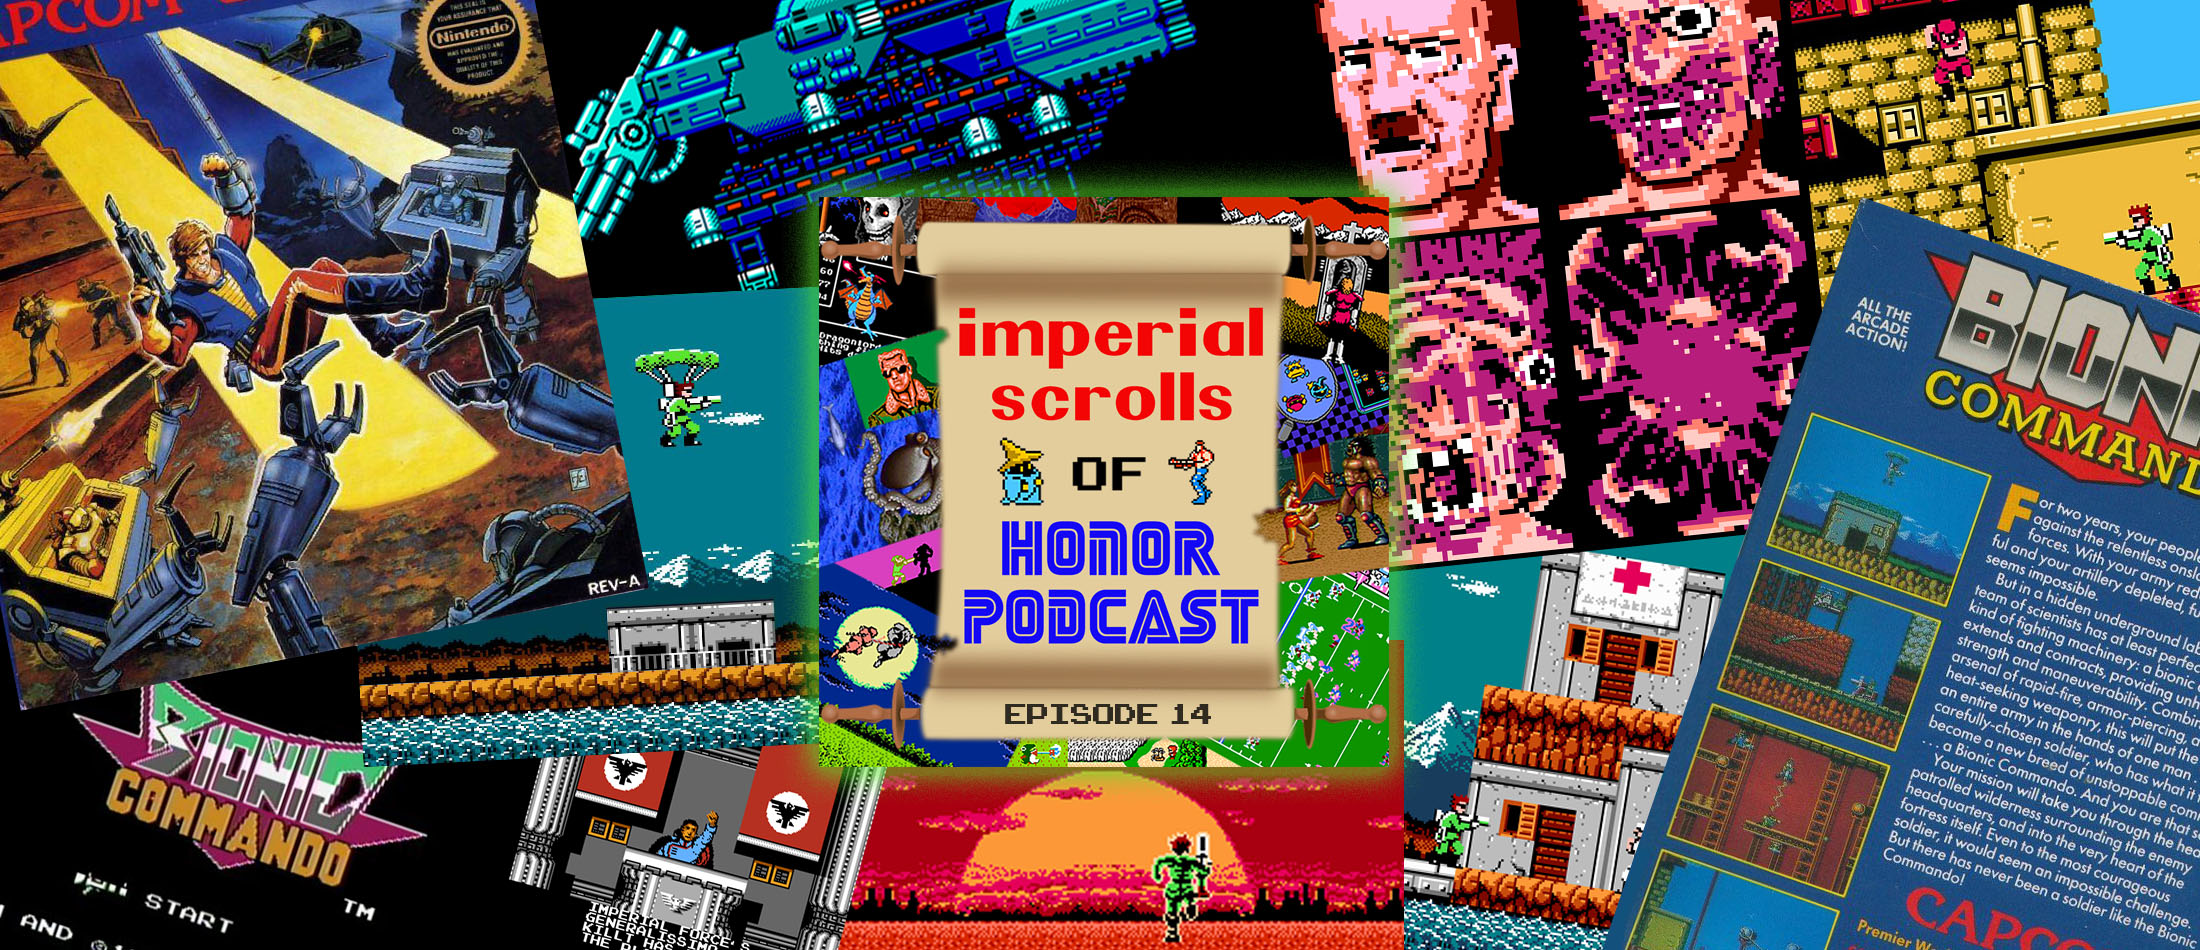 Imperial Scrolls of Honor Podcast - Episode 14 - Bionic Commando (NES)